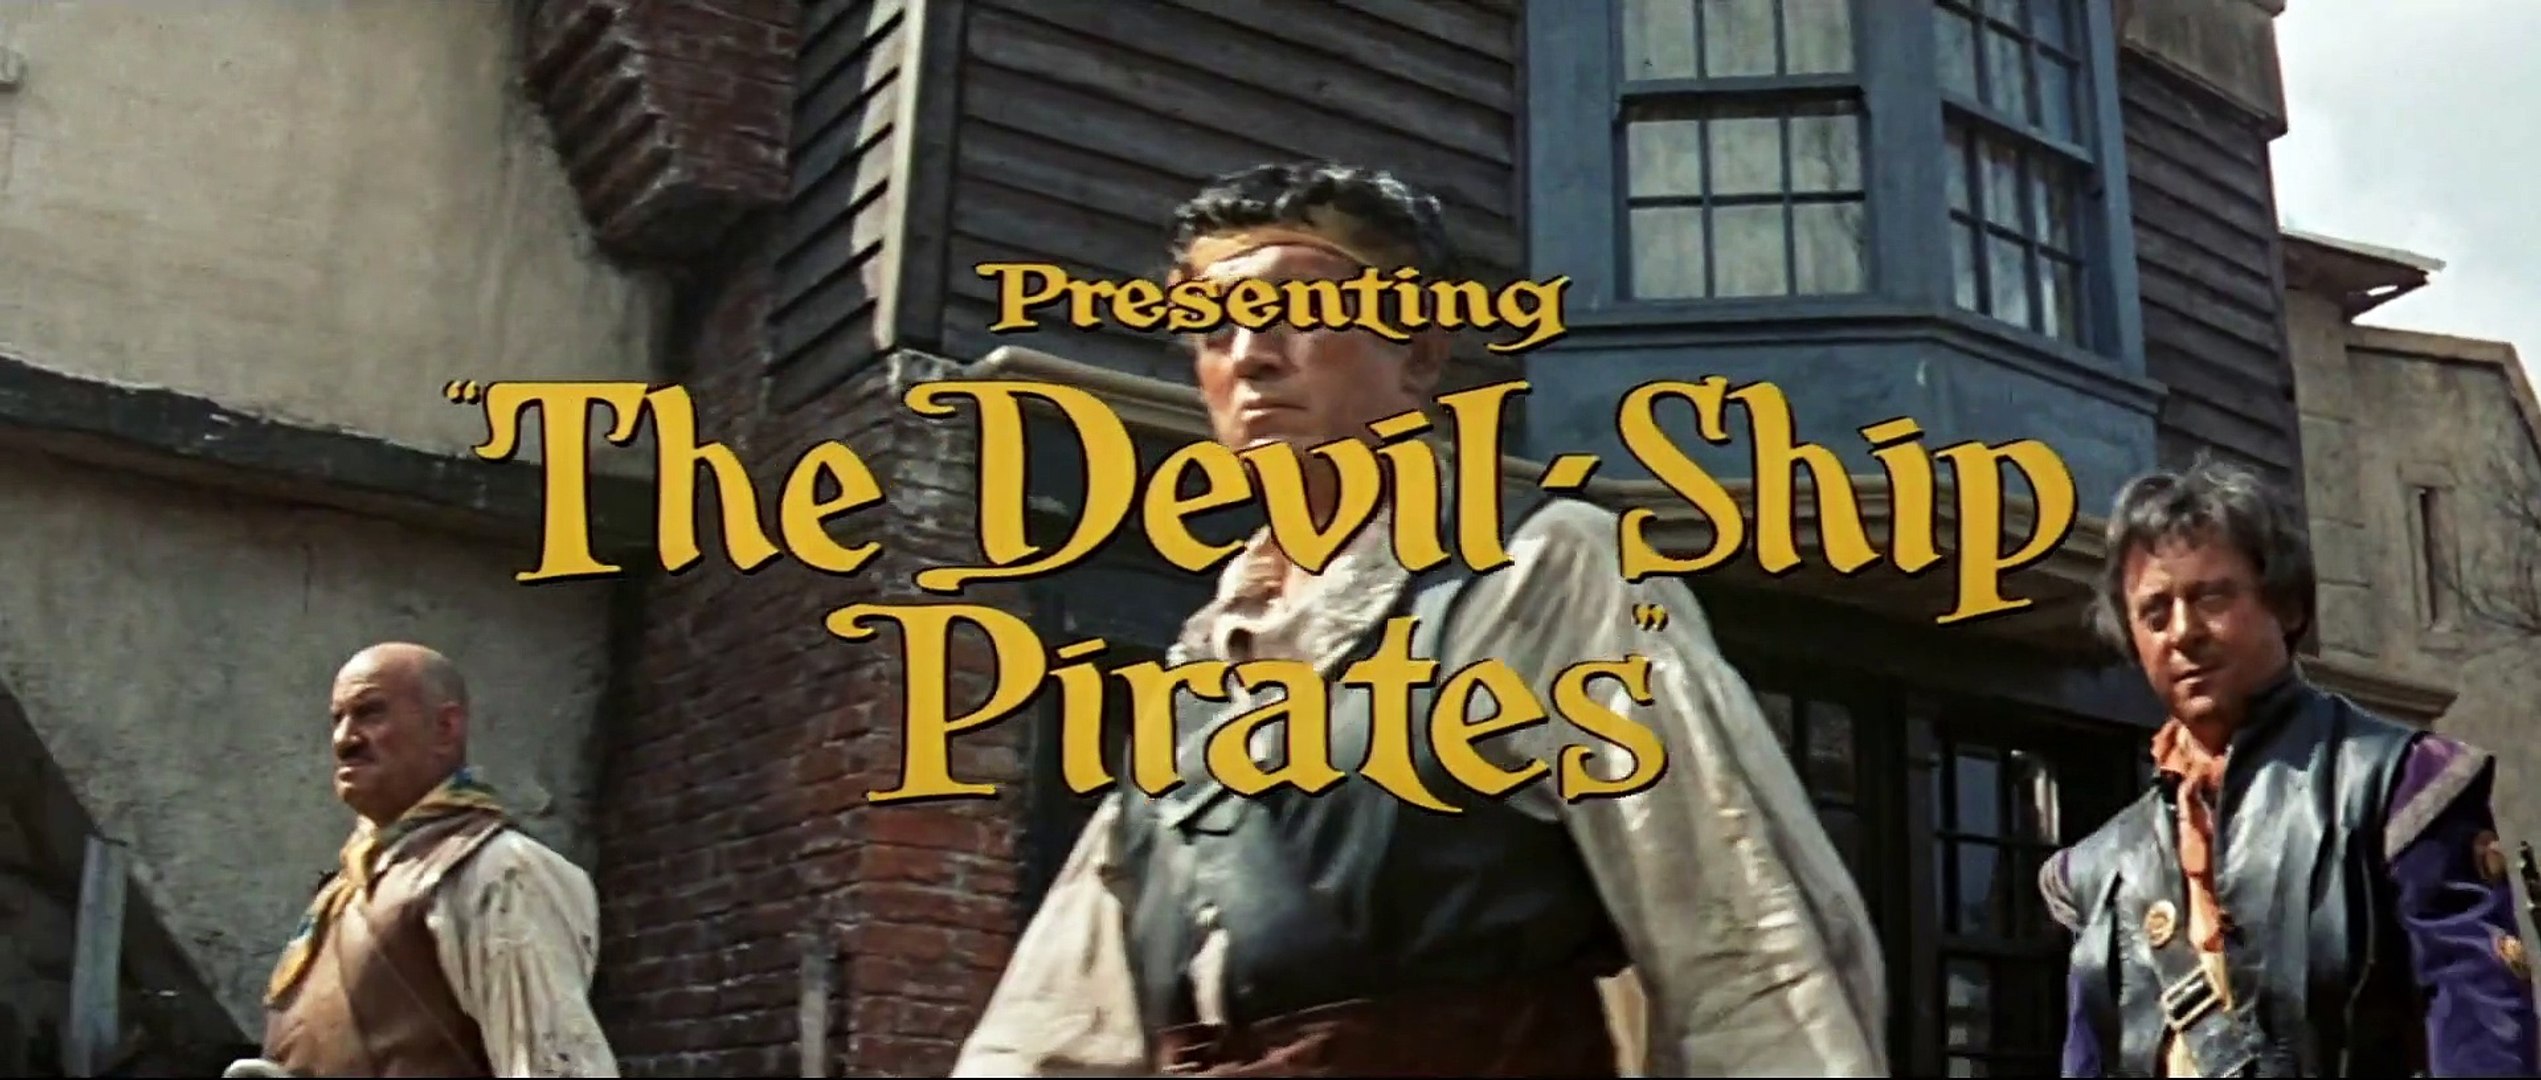 The Devil-Ship Pirates Trailer (1964) - video Dailymotion